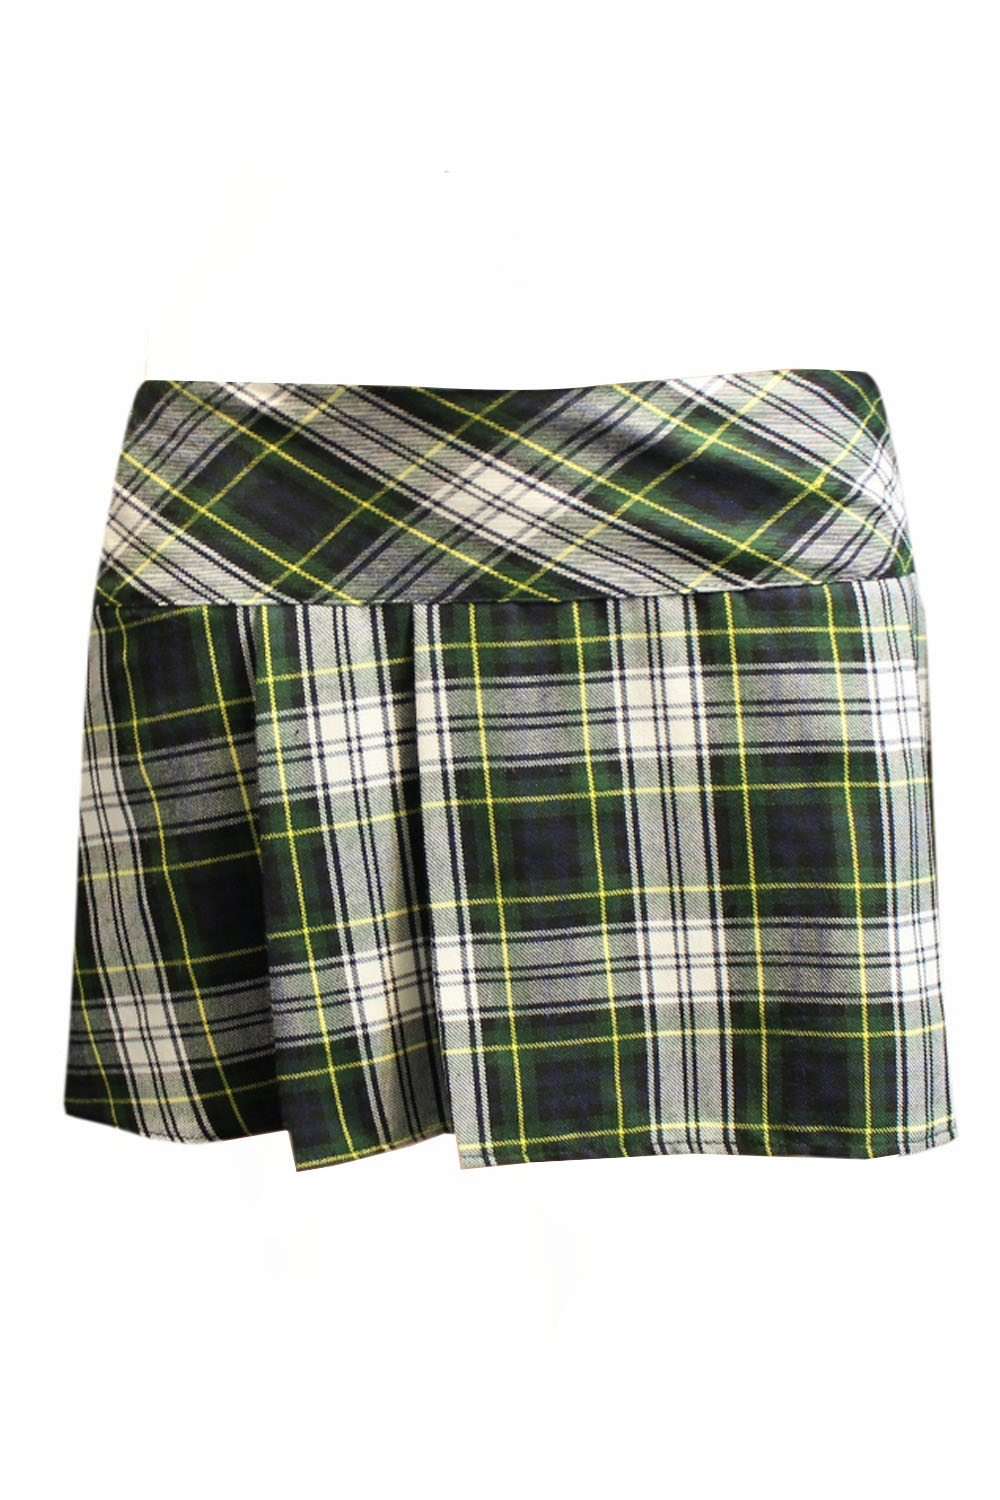 Crazy Chick Adult Box Pleated Green Grey Yellow Tartan Skirt (14 Inches)